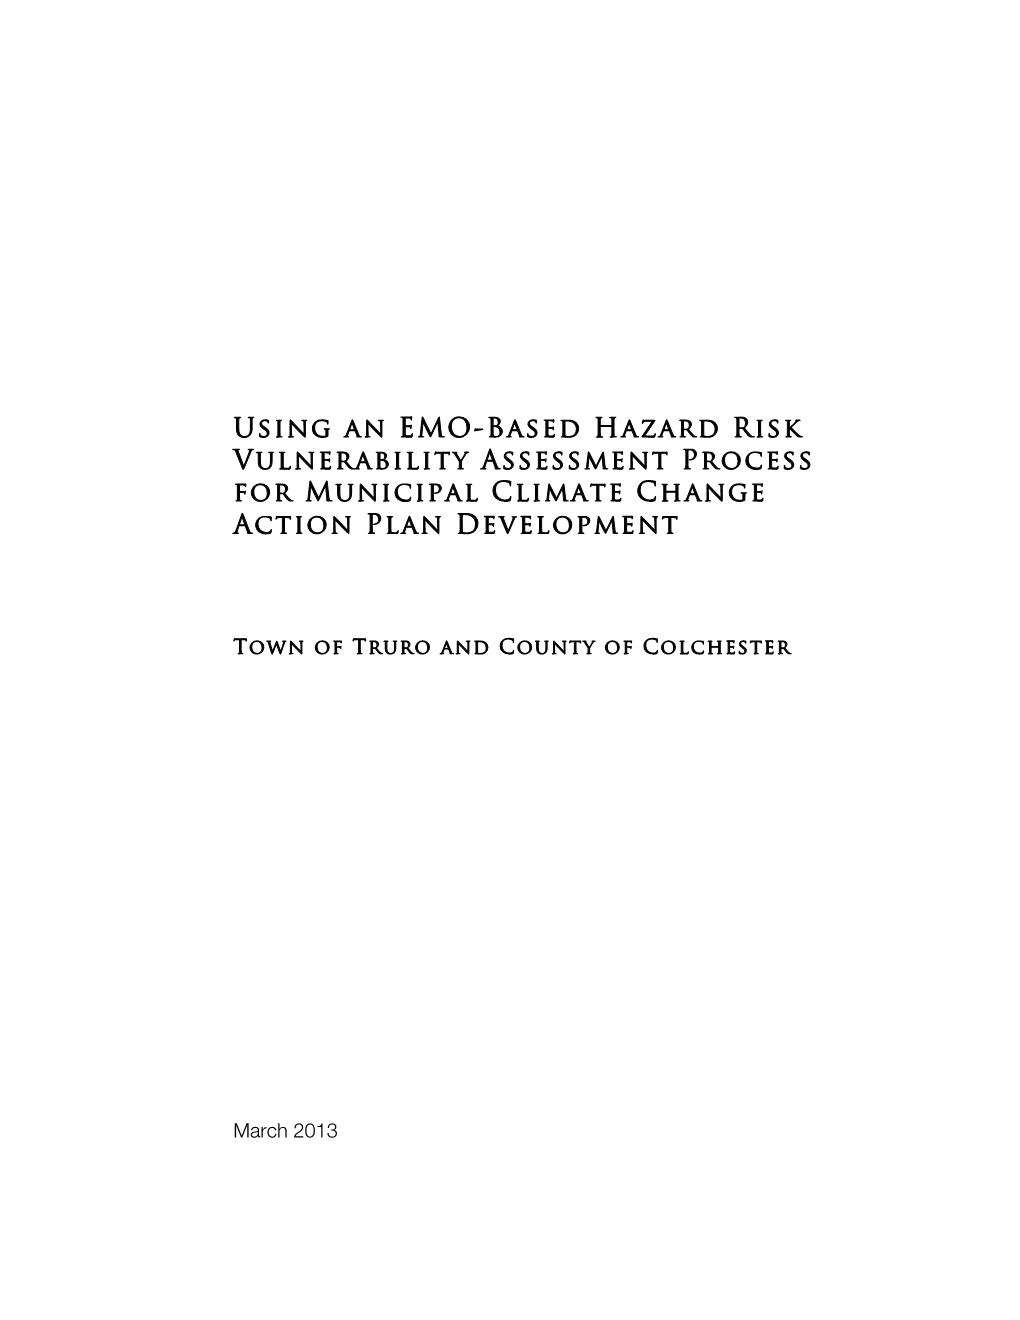 Using an EMO-Based Hazard Risk Vulnerability Assessment Process for Municipal Climate Change Action Plan Development